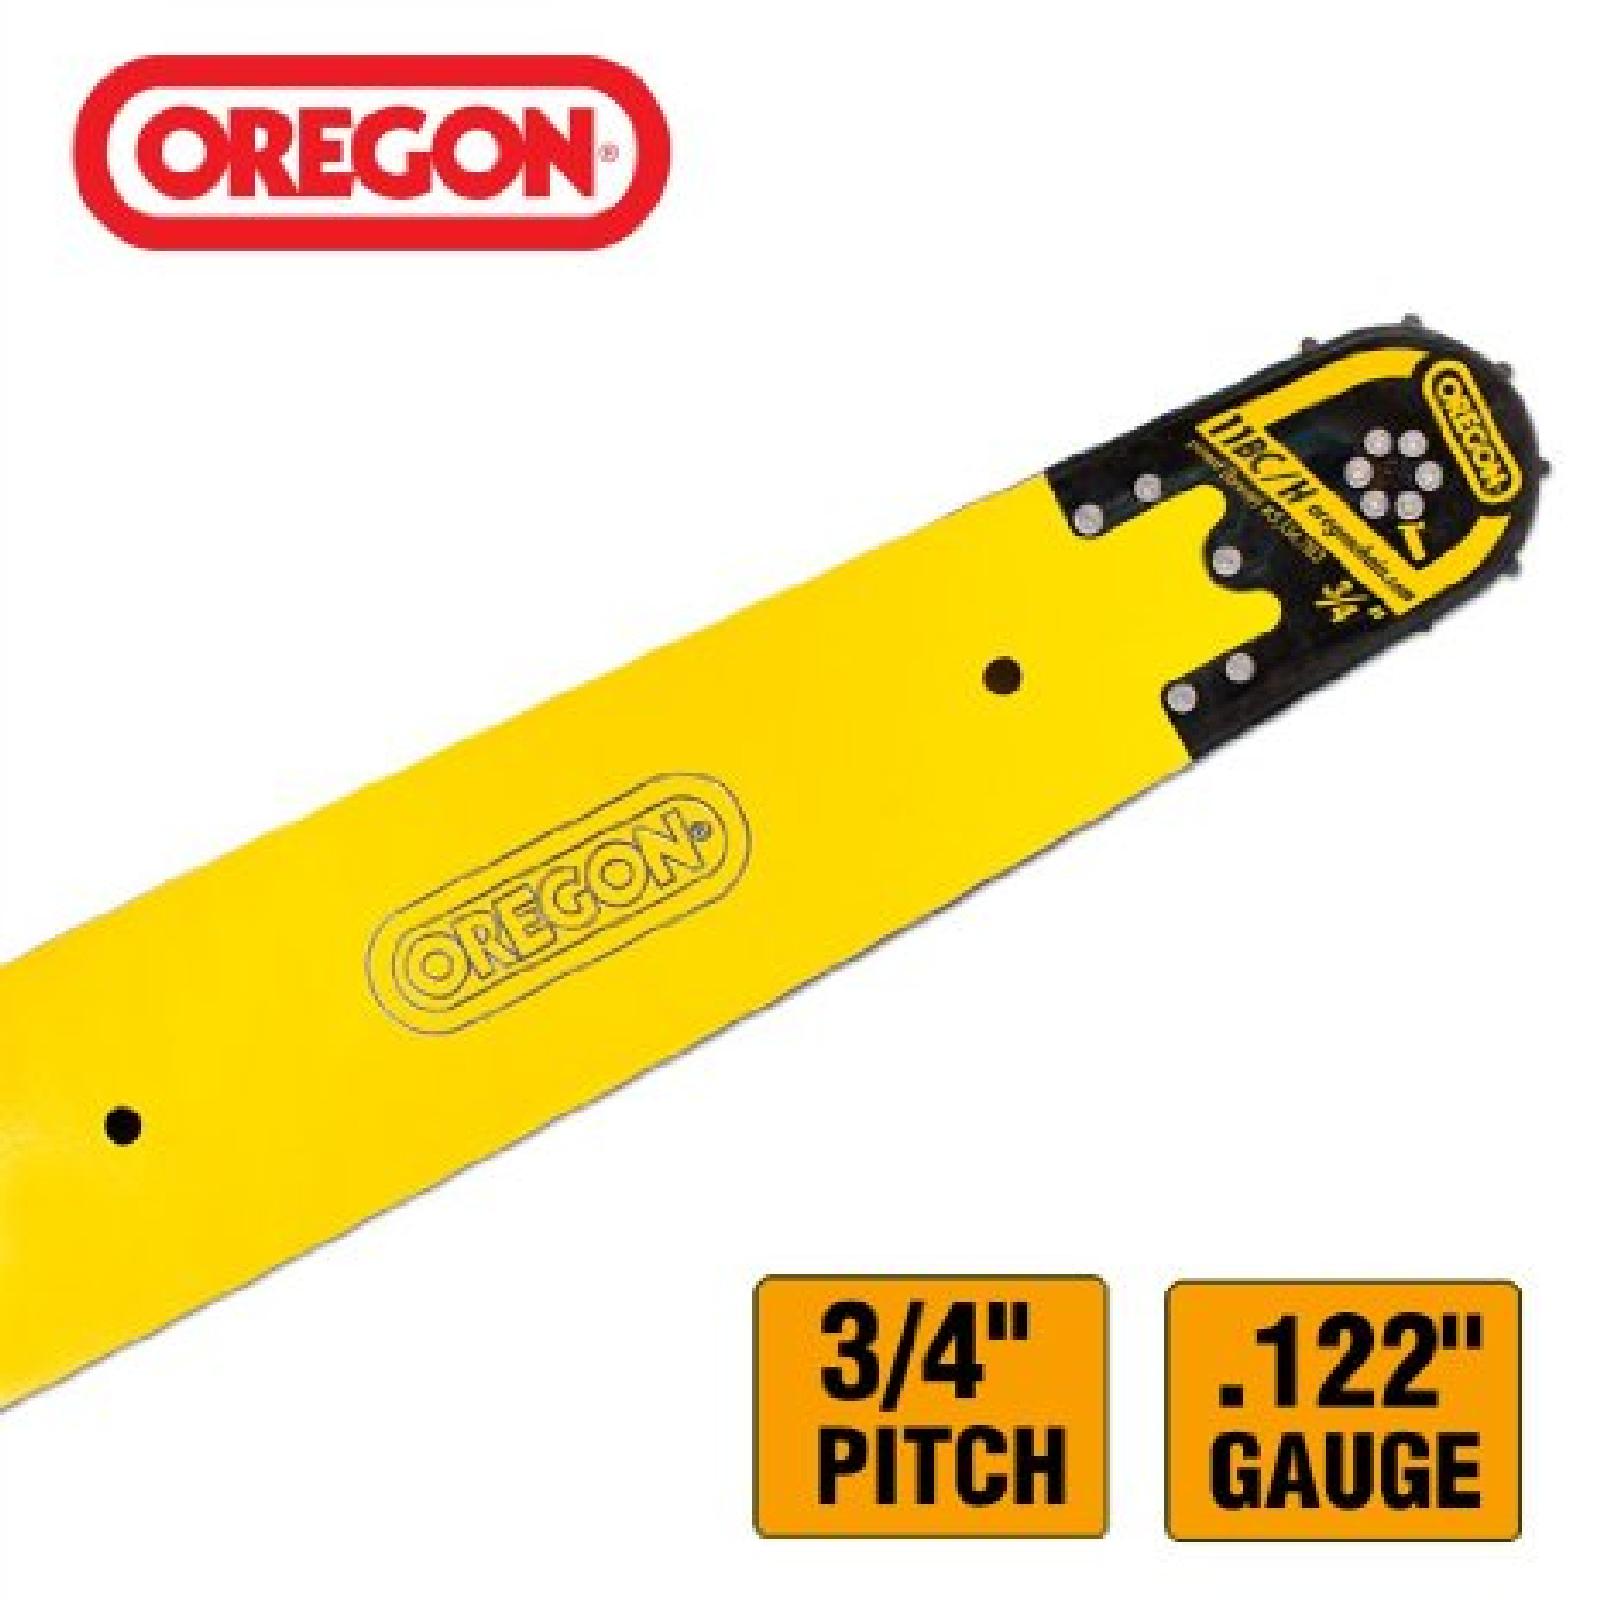 3/4 PITCH HARVESTER BAR part# 341SNCT133 by Oregon